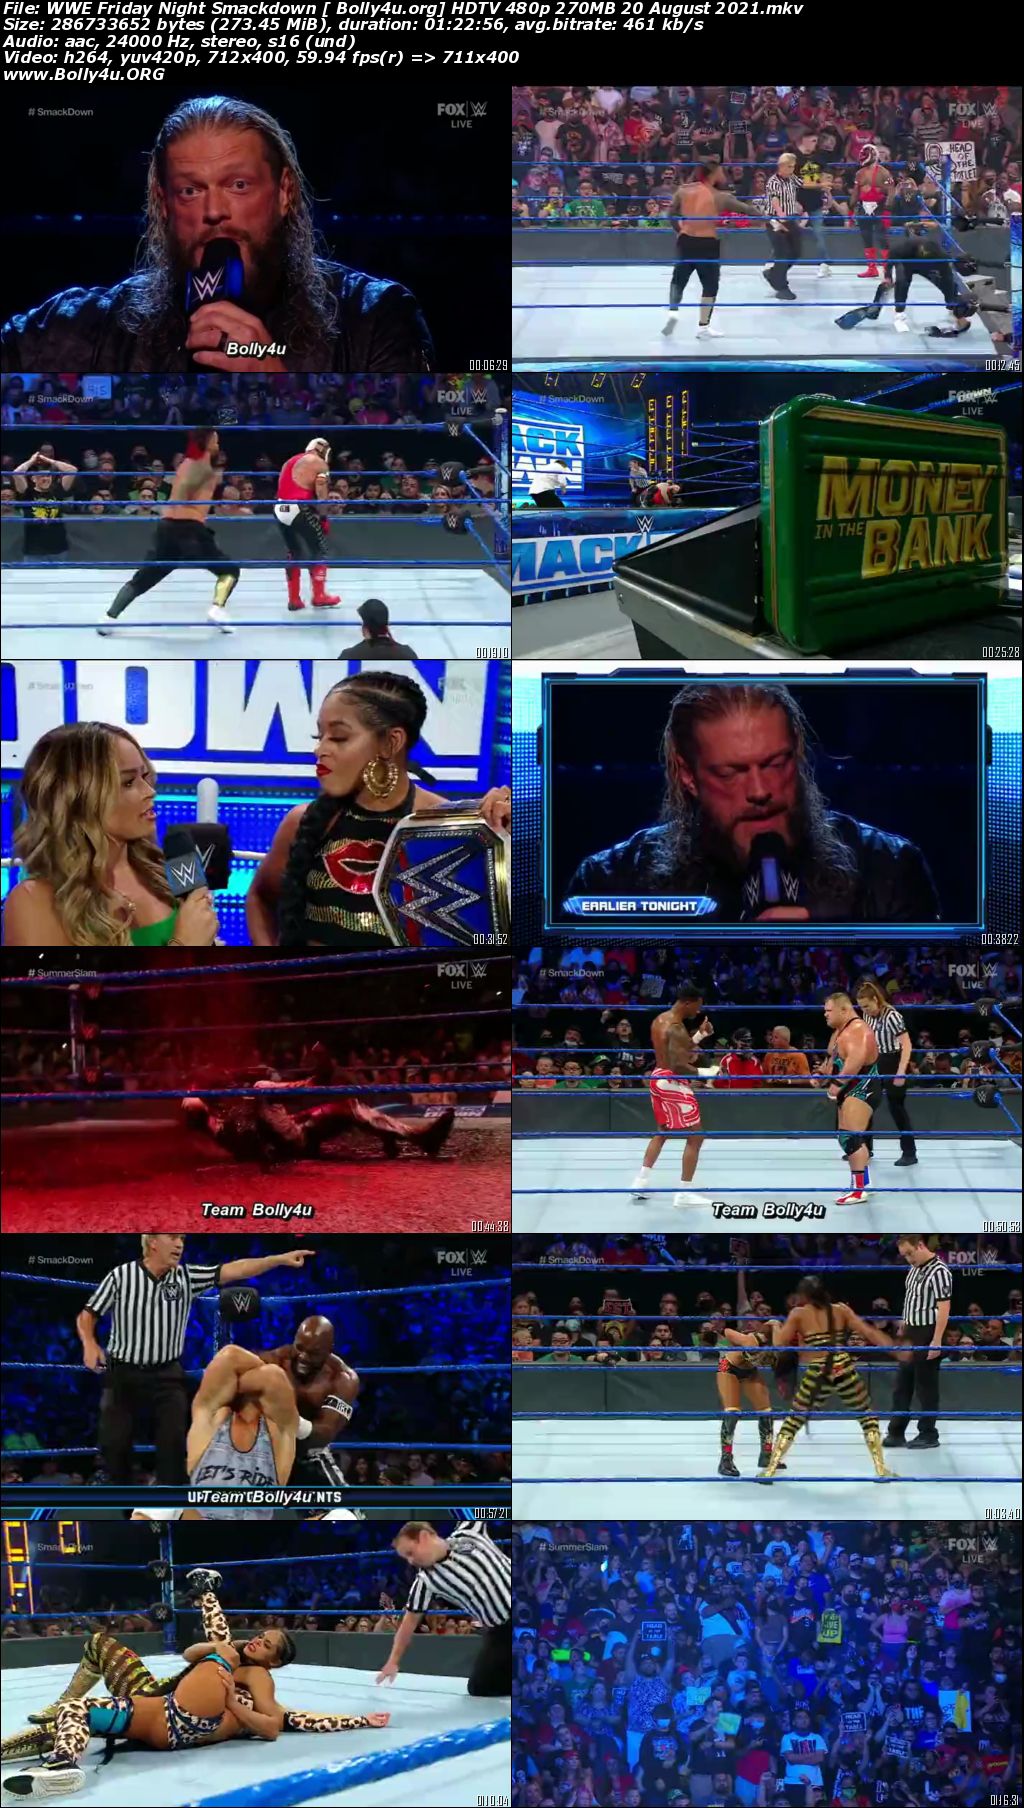 WWE Friday Night Smackdown HDTV 480p 270MB 20 August 2021 Download